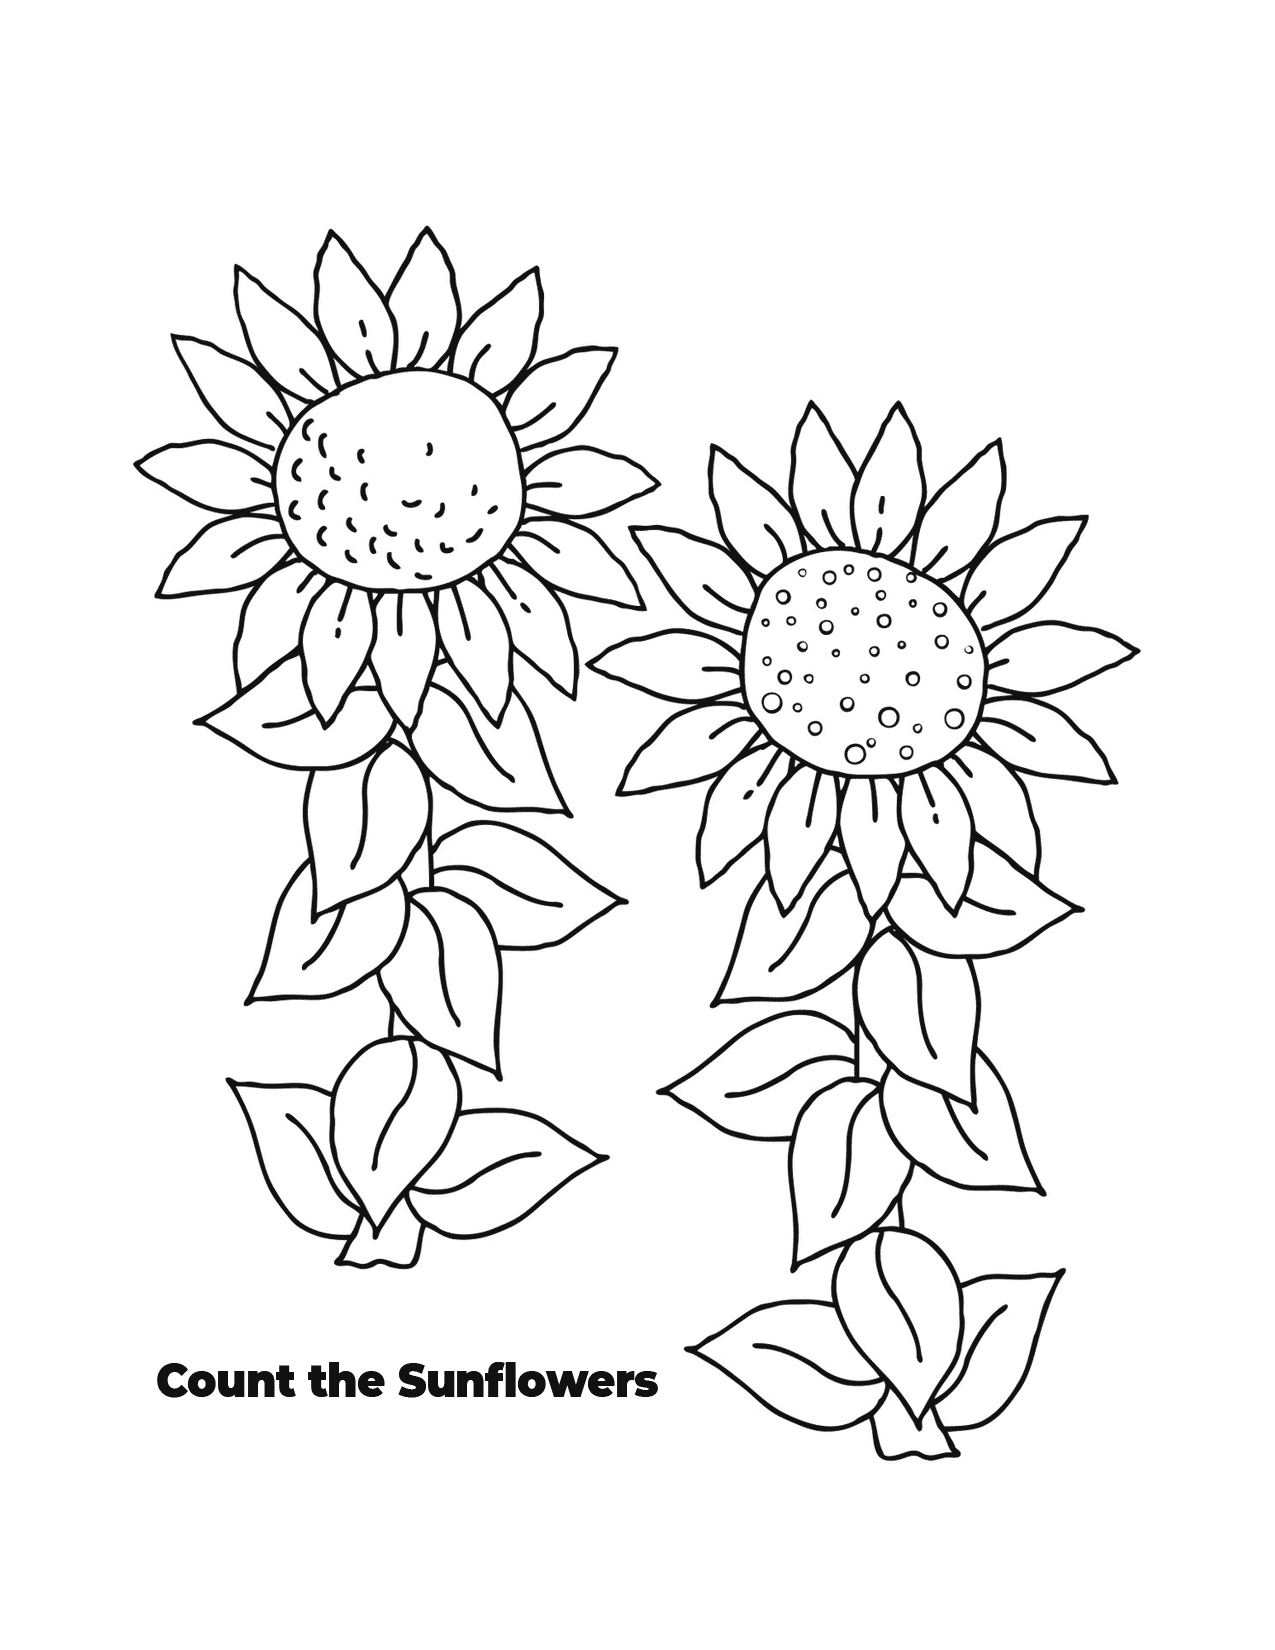 Two Sunflowers Coloring Page